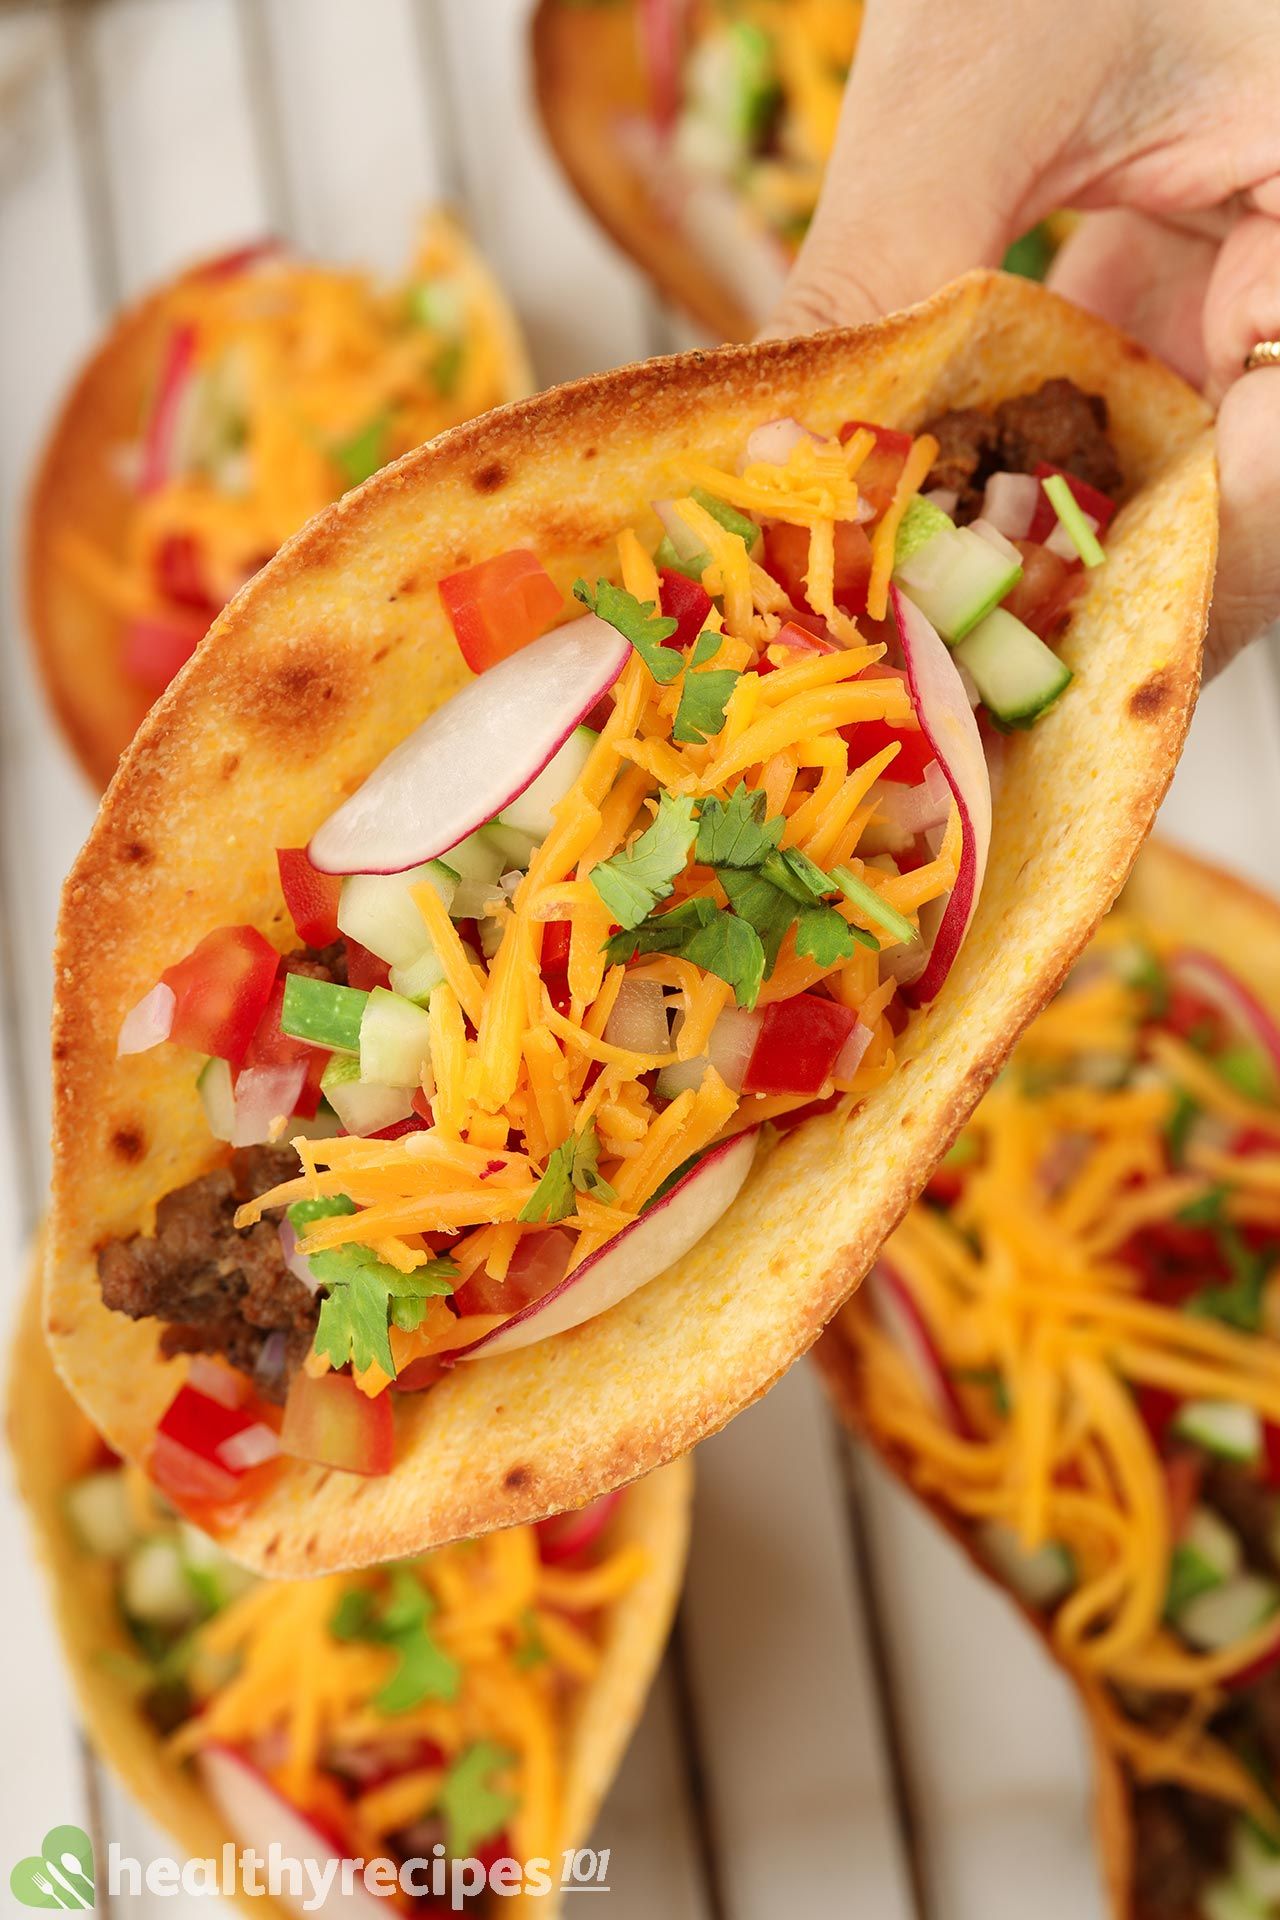 Is Ground Beef Taco Healthy